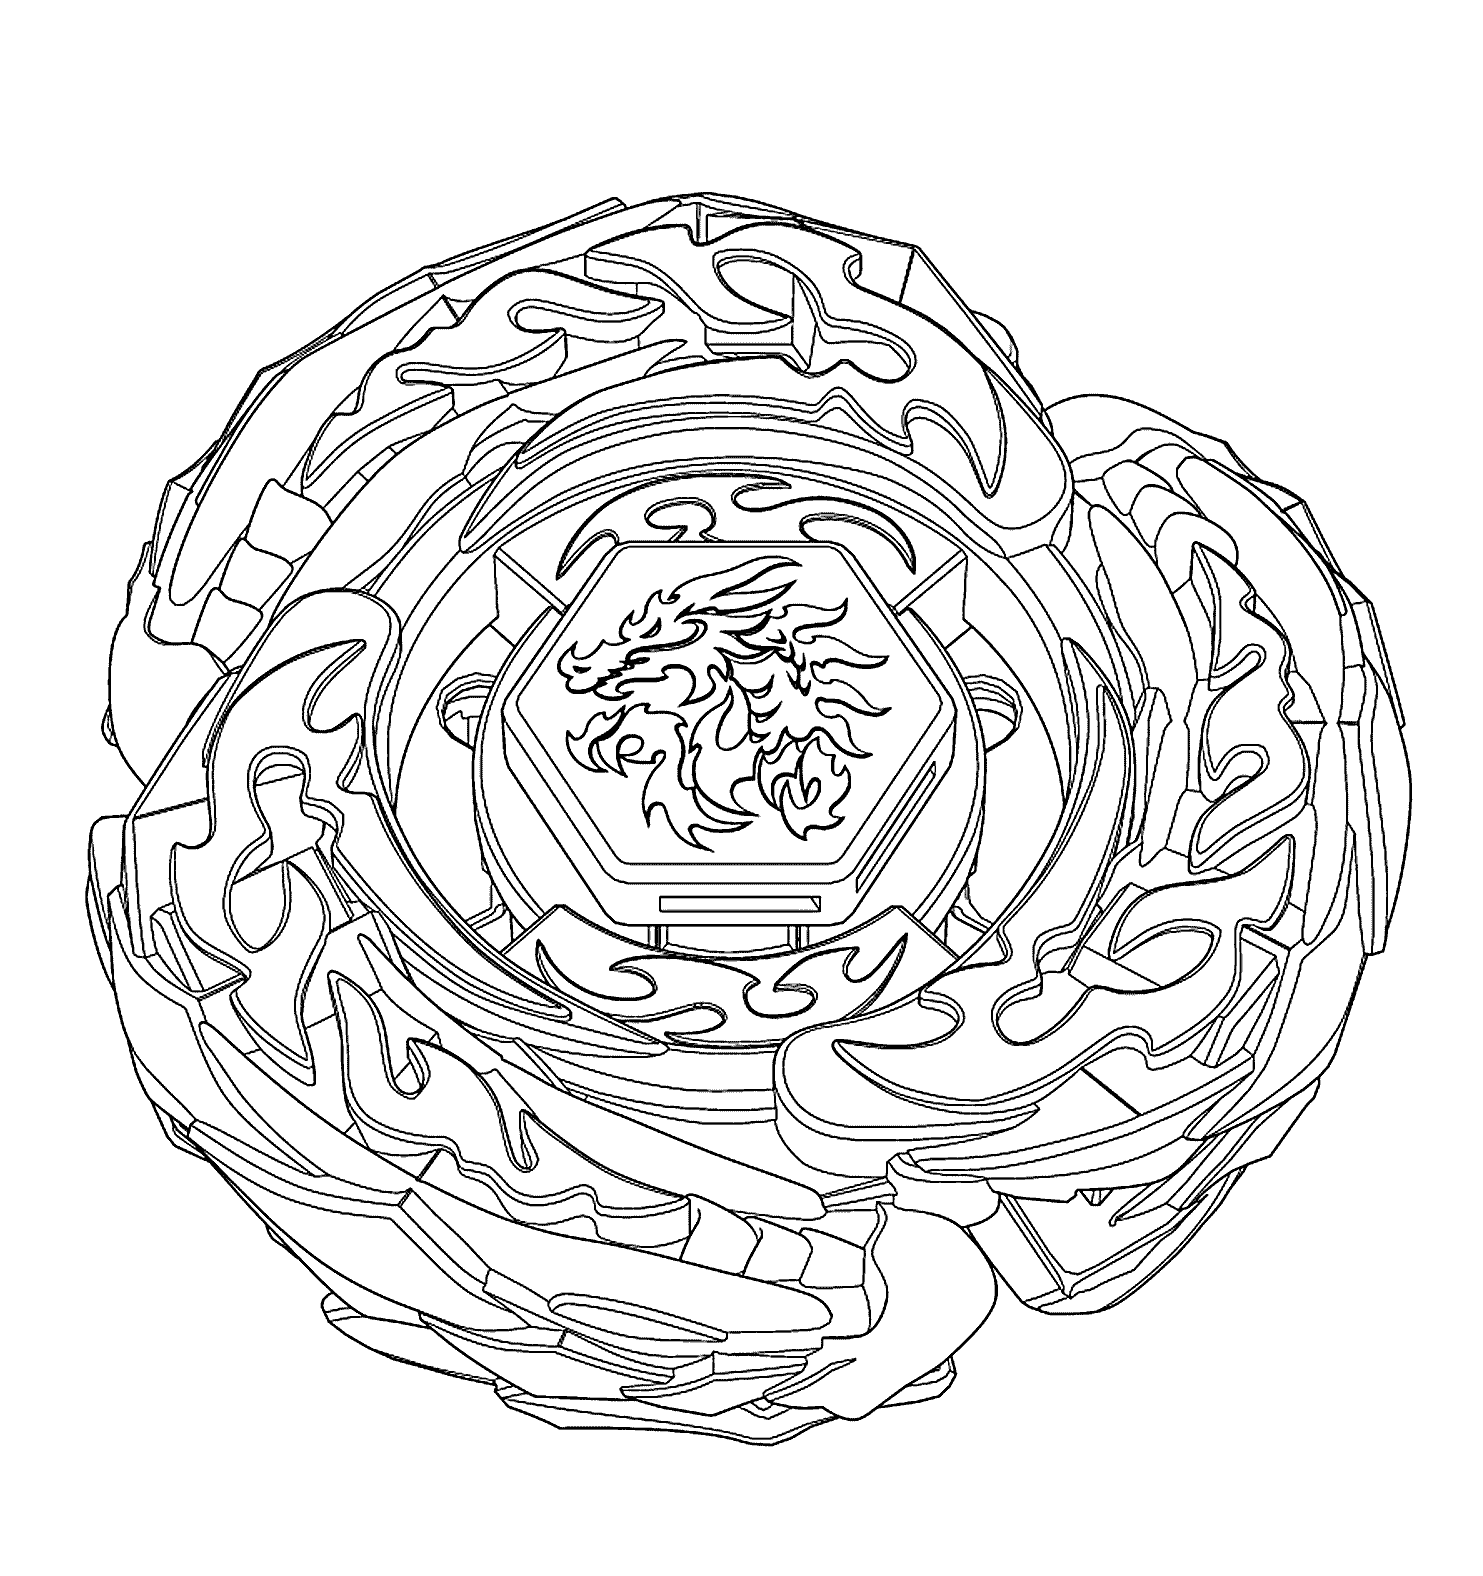 Drago Beyblade Coloring Pages For Kids Printable Free Coloring Pages For Kids Colorin